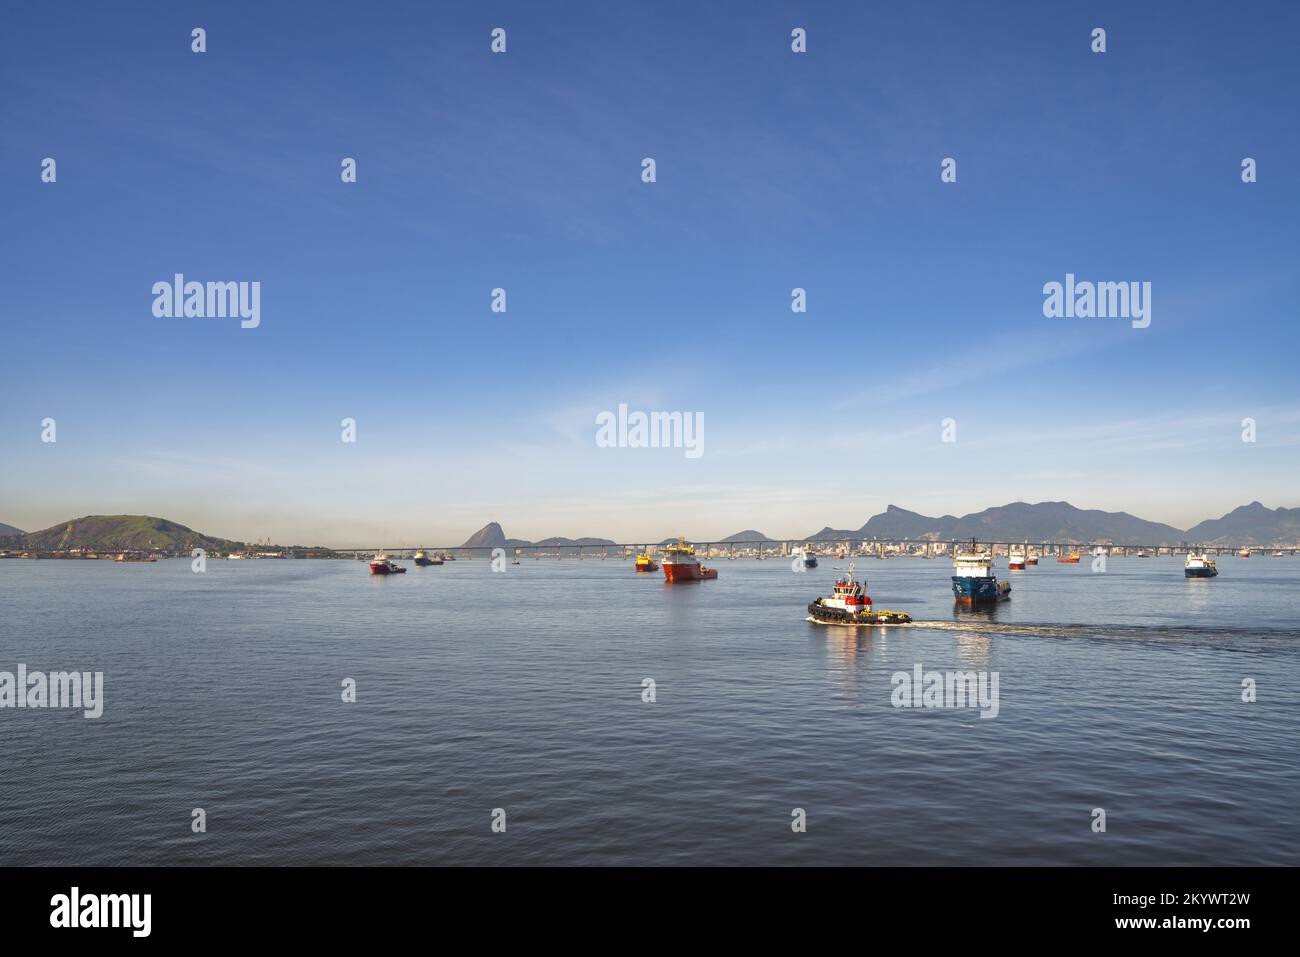 Guanabara bay anchorage area. Lots of vessels at anchor, mostly vessels working in the oil industry. Stock Photo